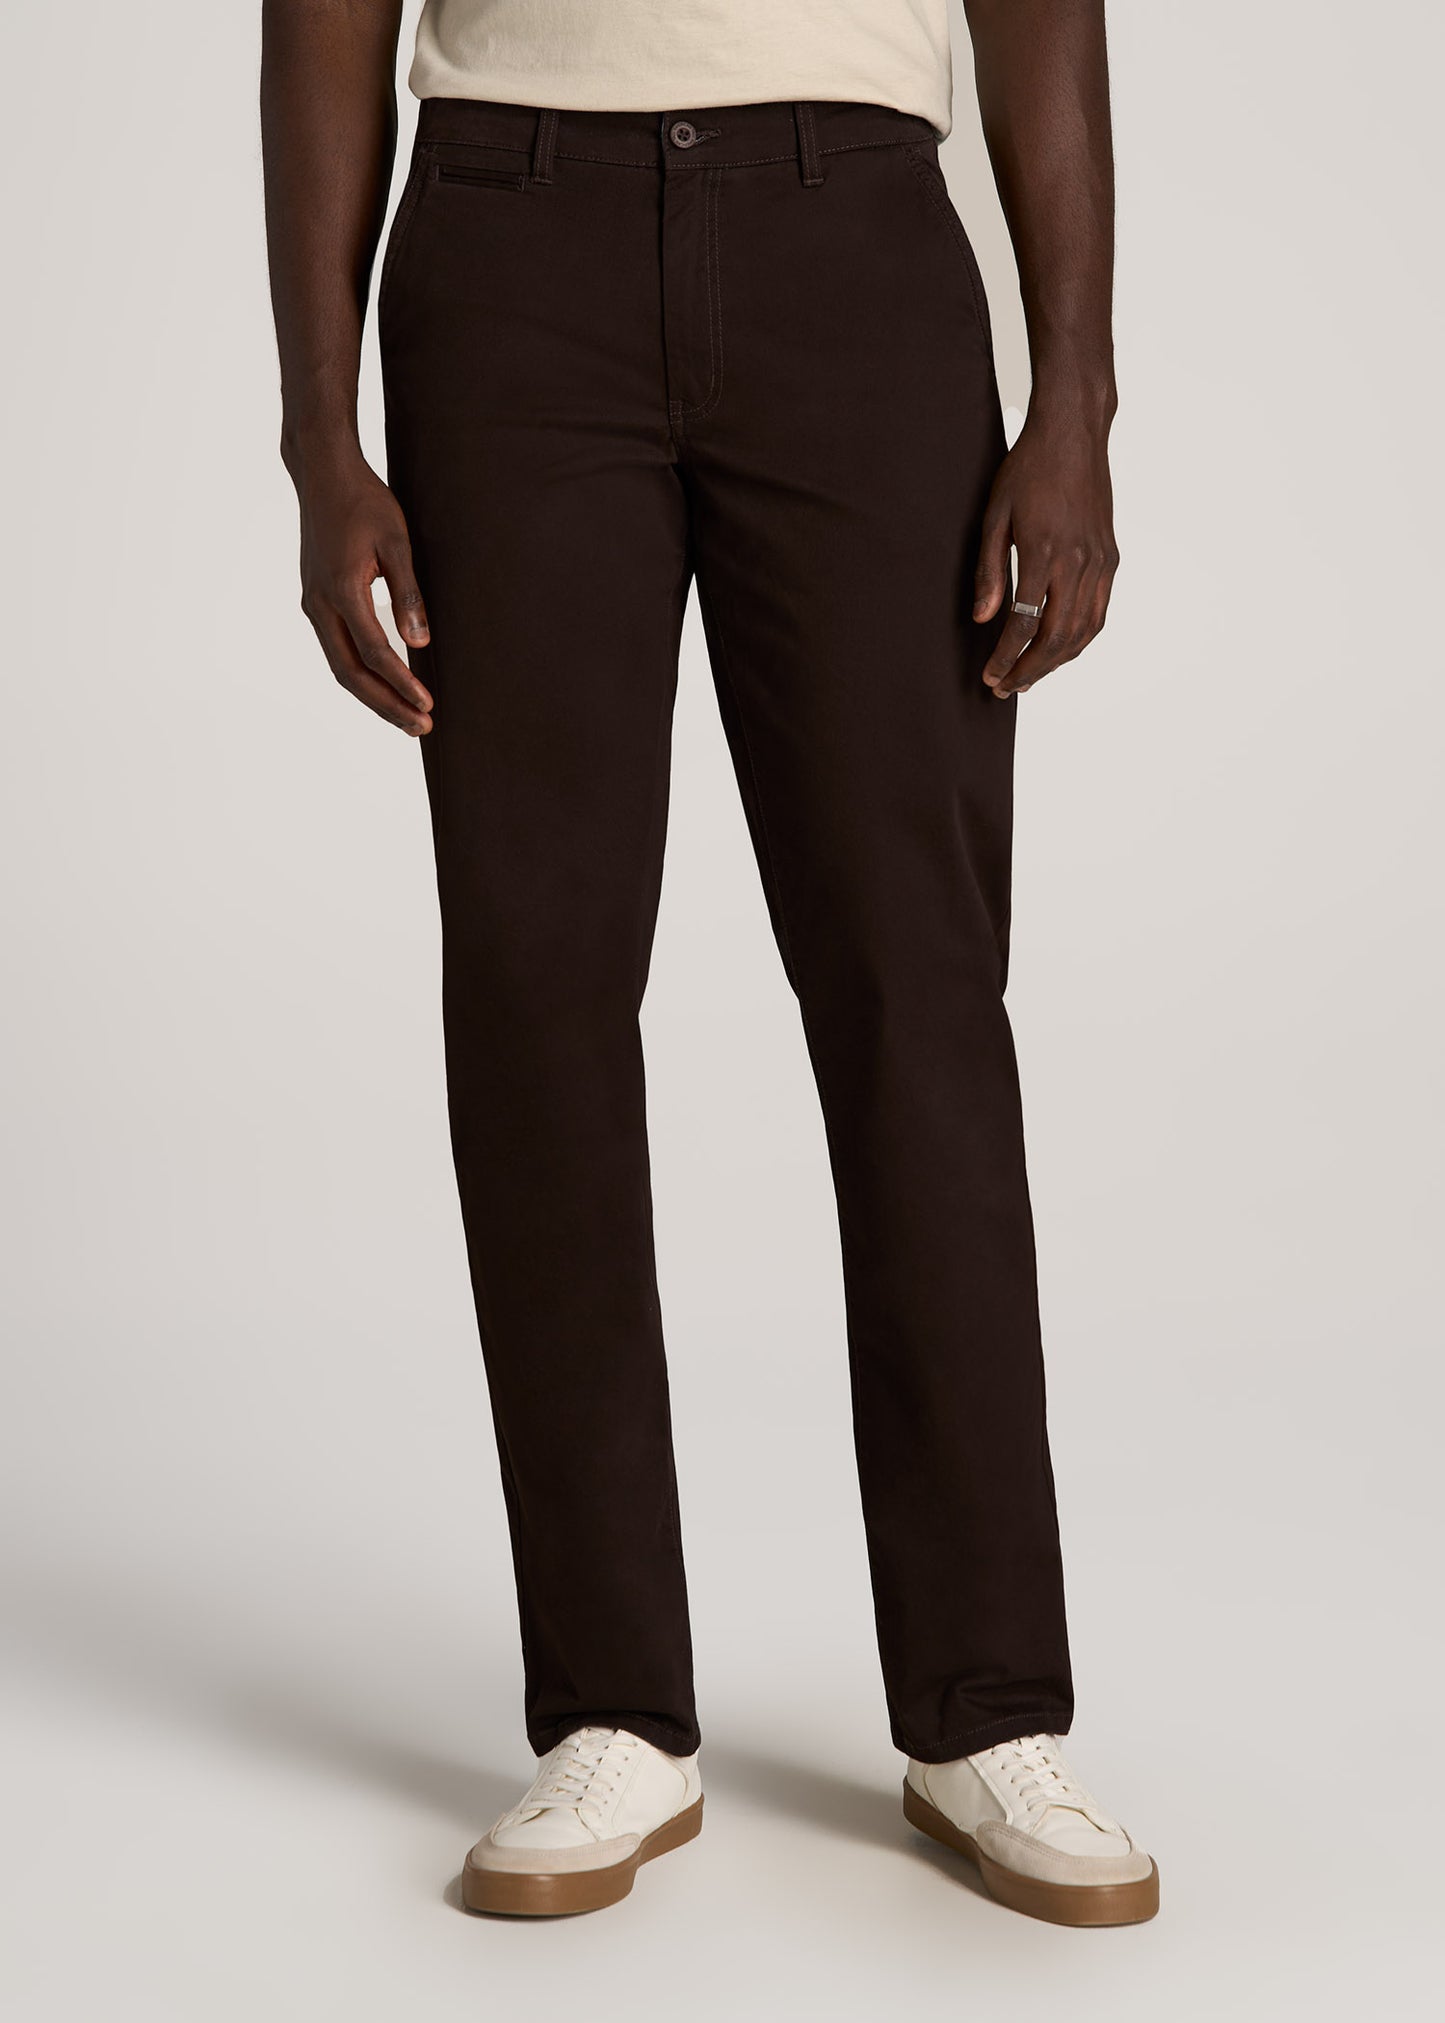 Carman TAPERED Chinos in Chocolate - Pants for Tall Men